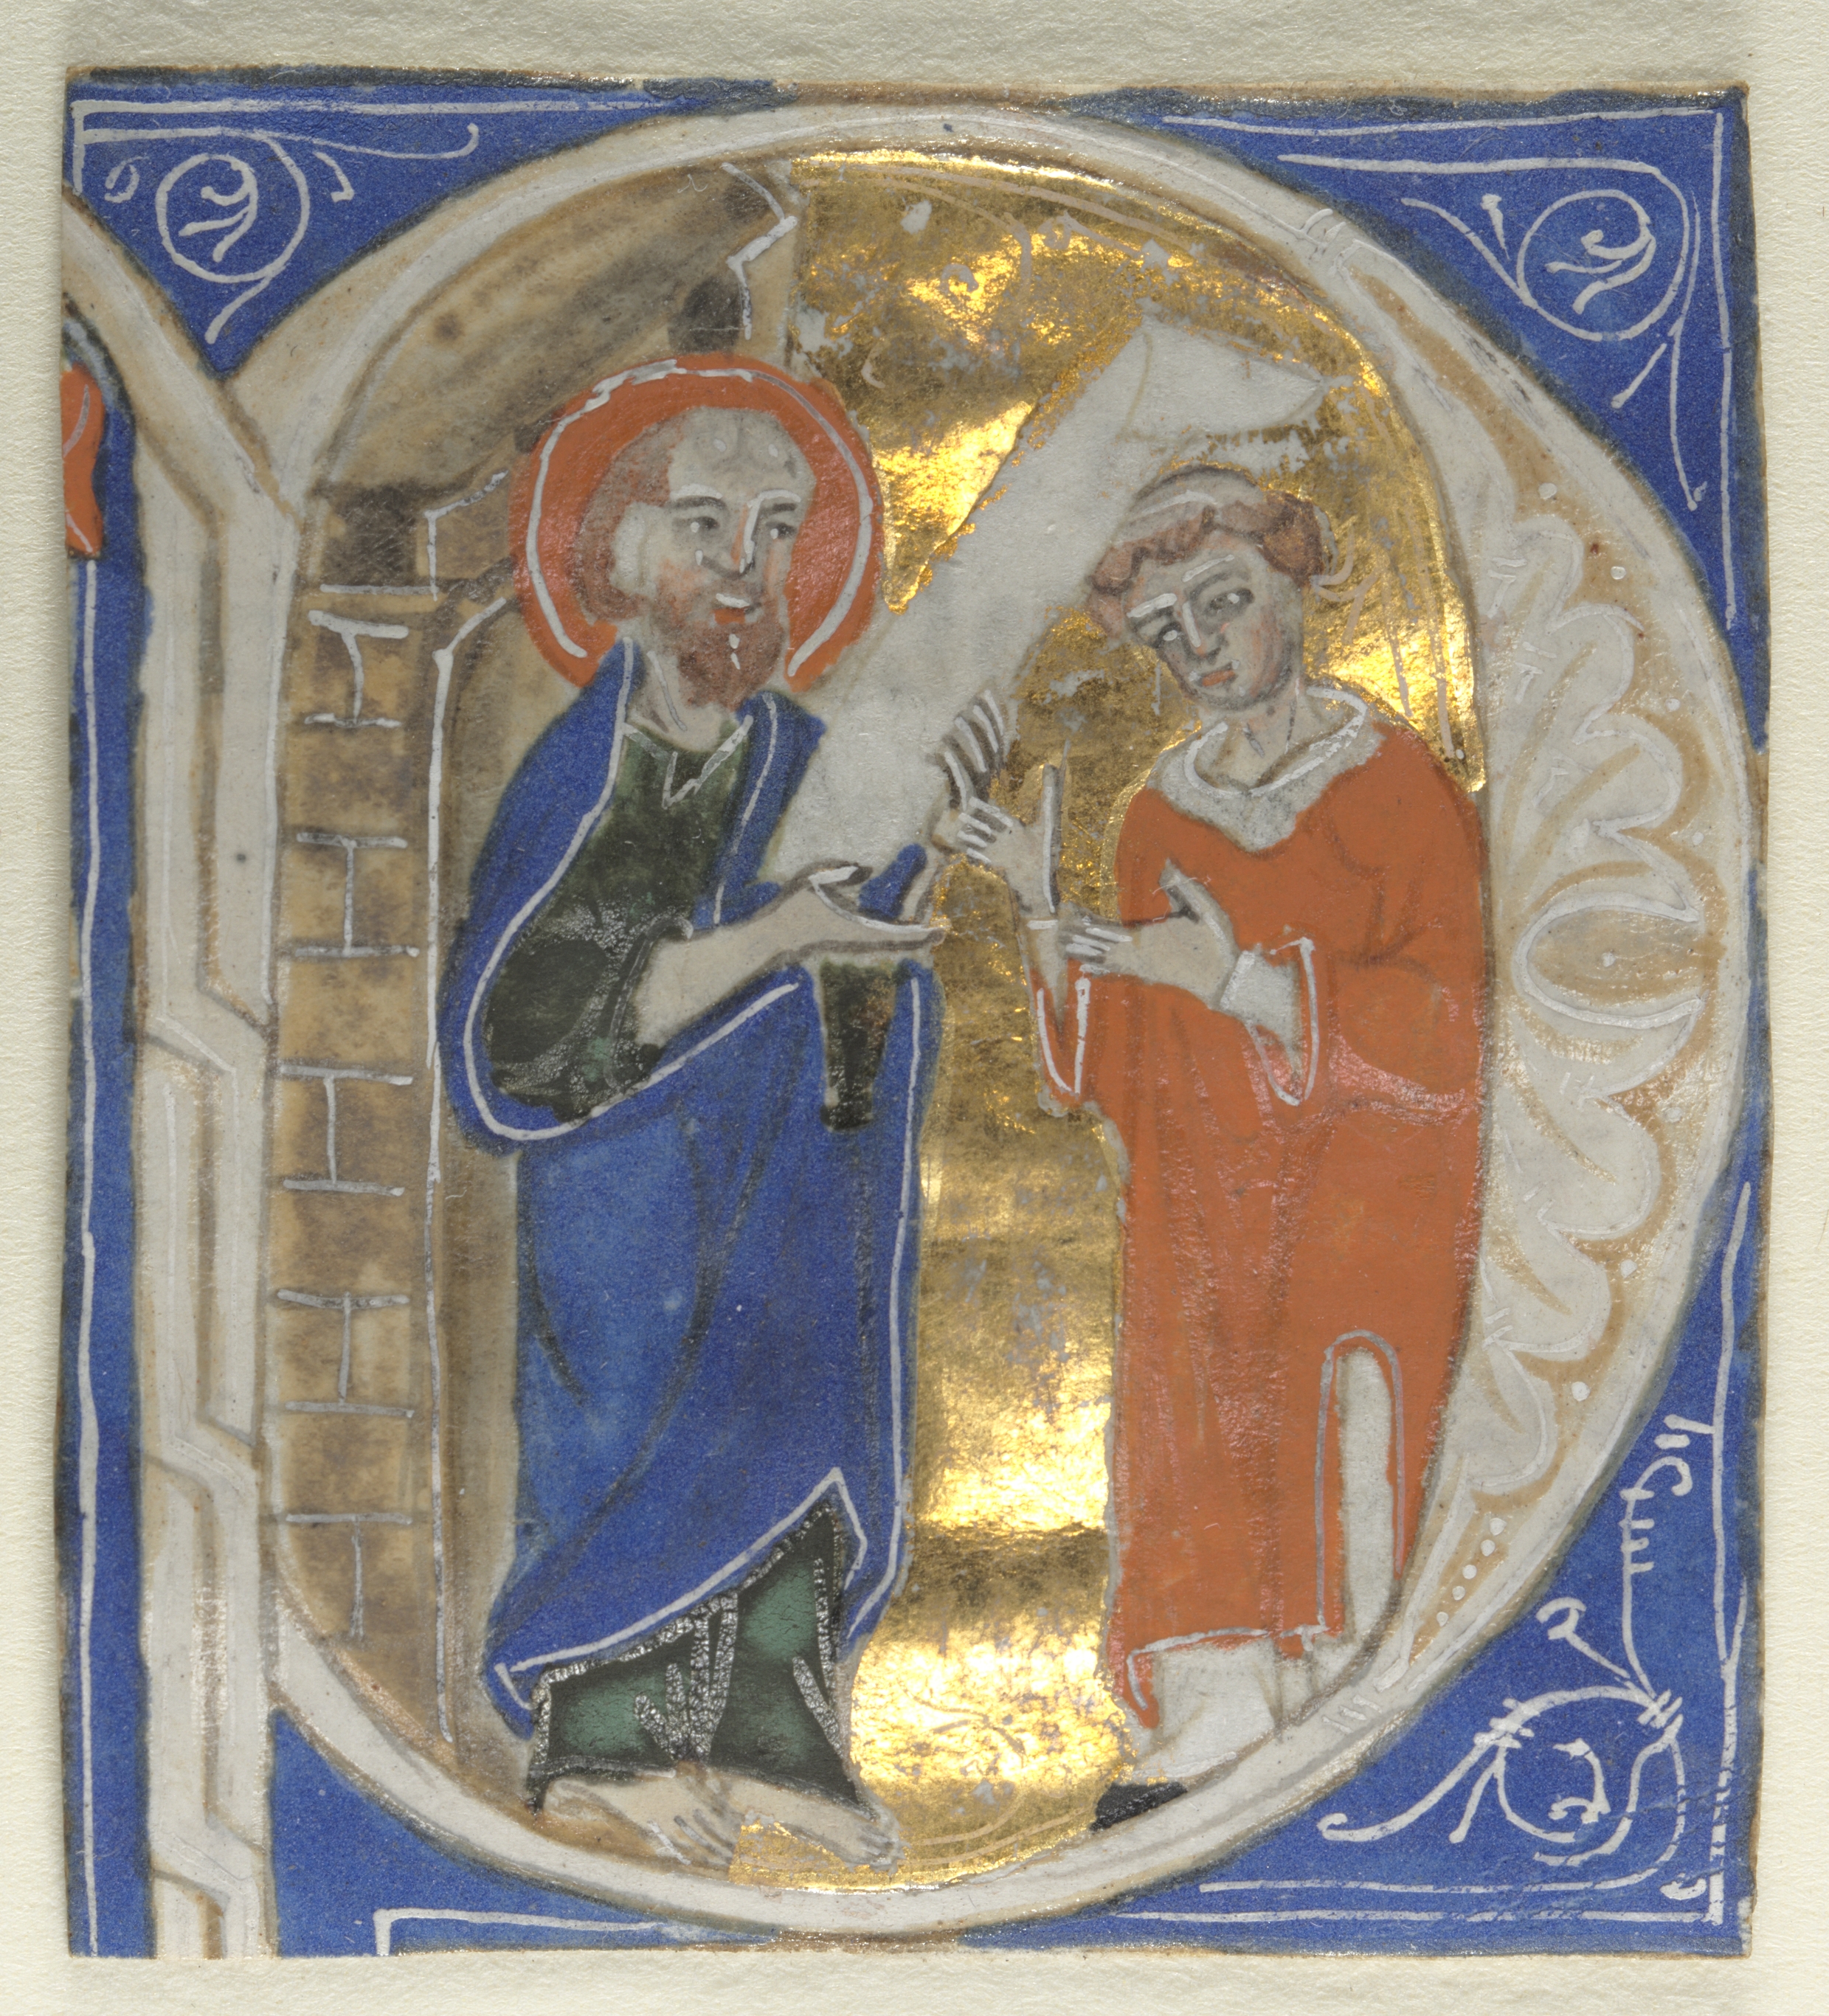 Historiated Initial Excised from a Bible: St. Paul and a Cleric